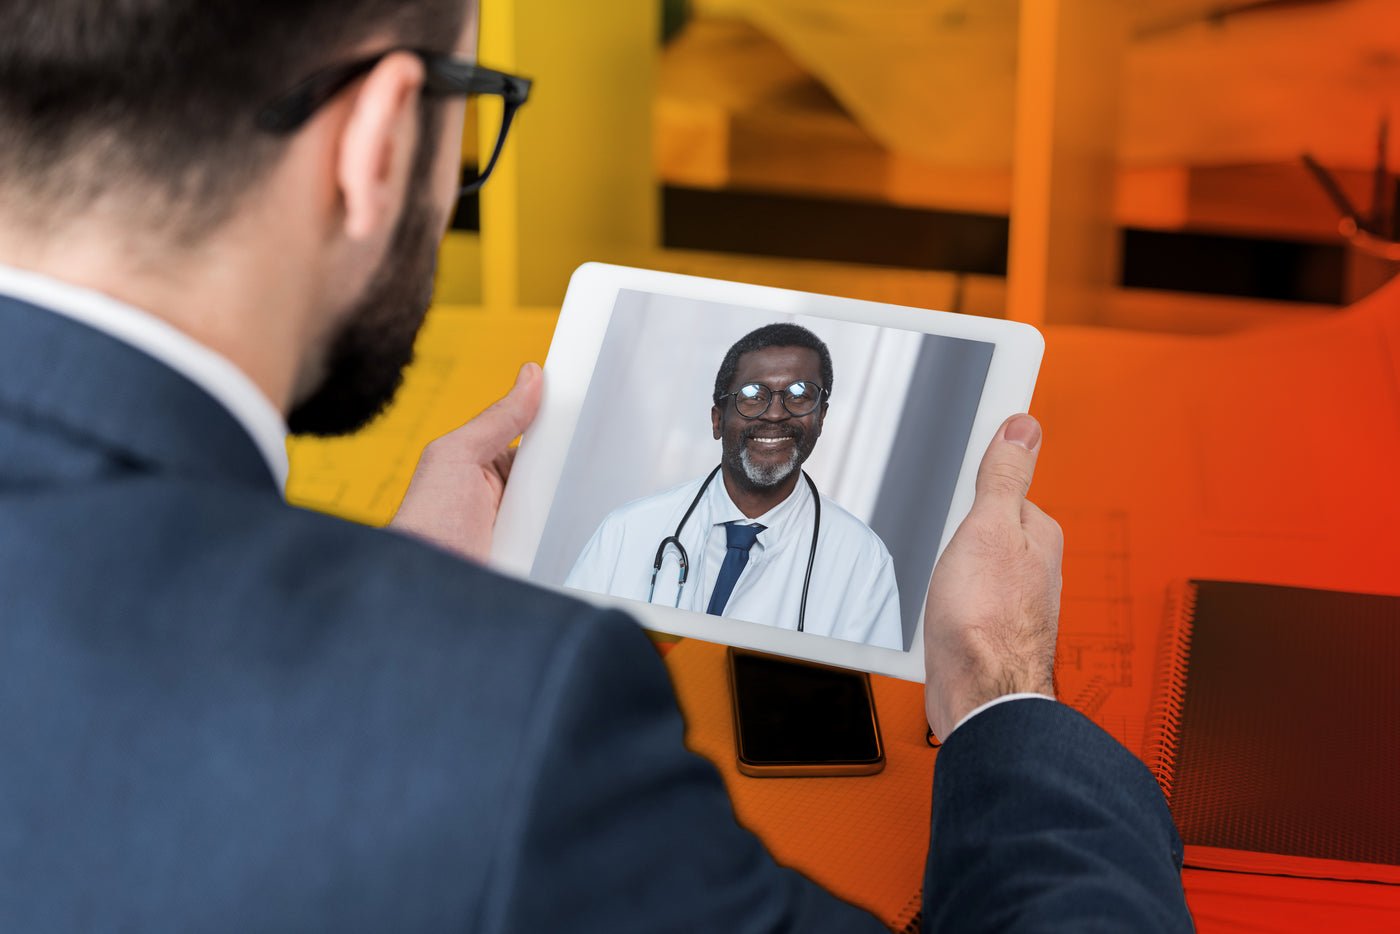 Bosley Doctor Video Visit - Man With Tablet in Hands